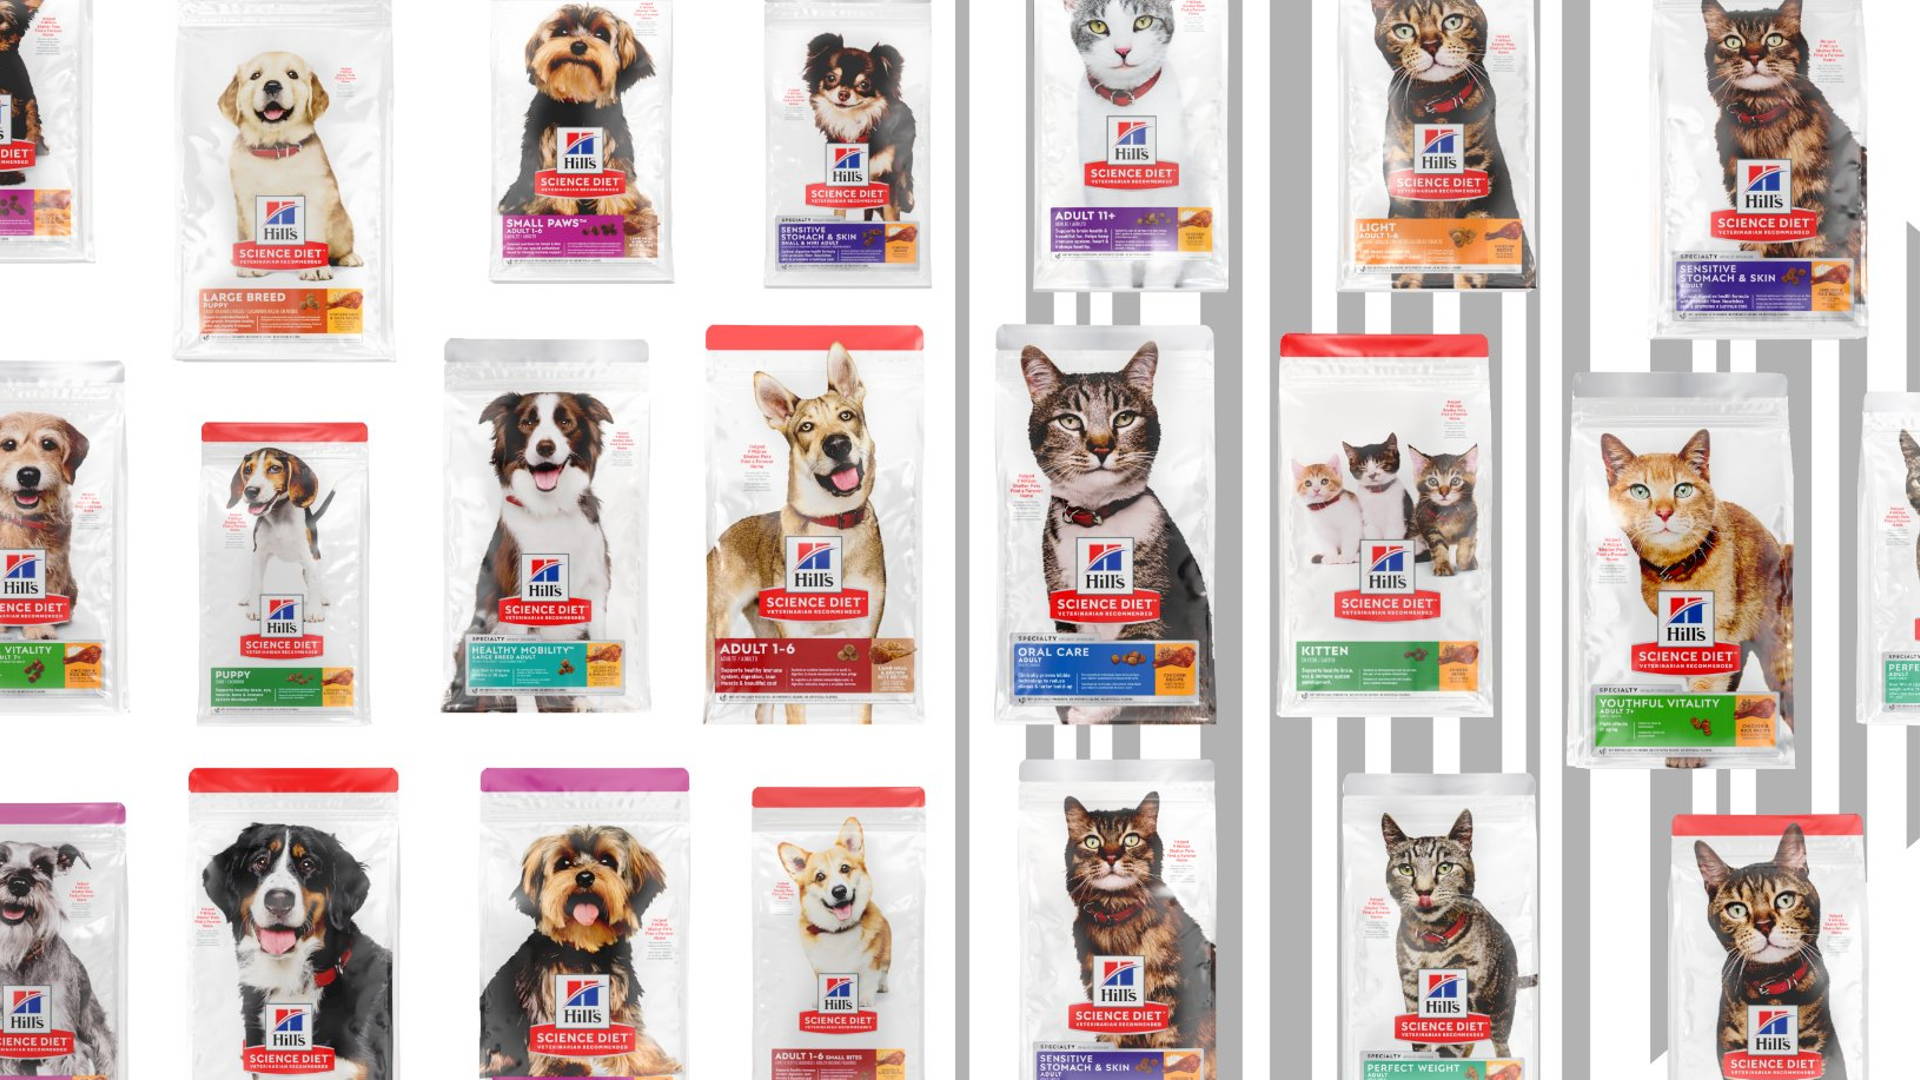 Pet Food Titans Mars, Purina, and Hill's Face Claims From Dog and